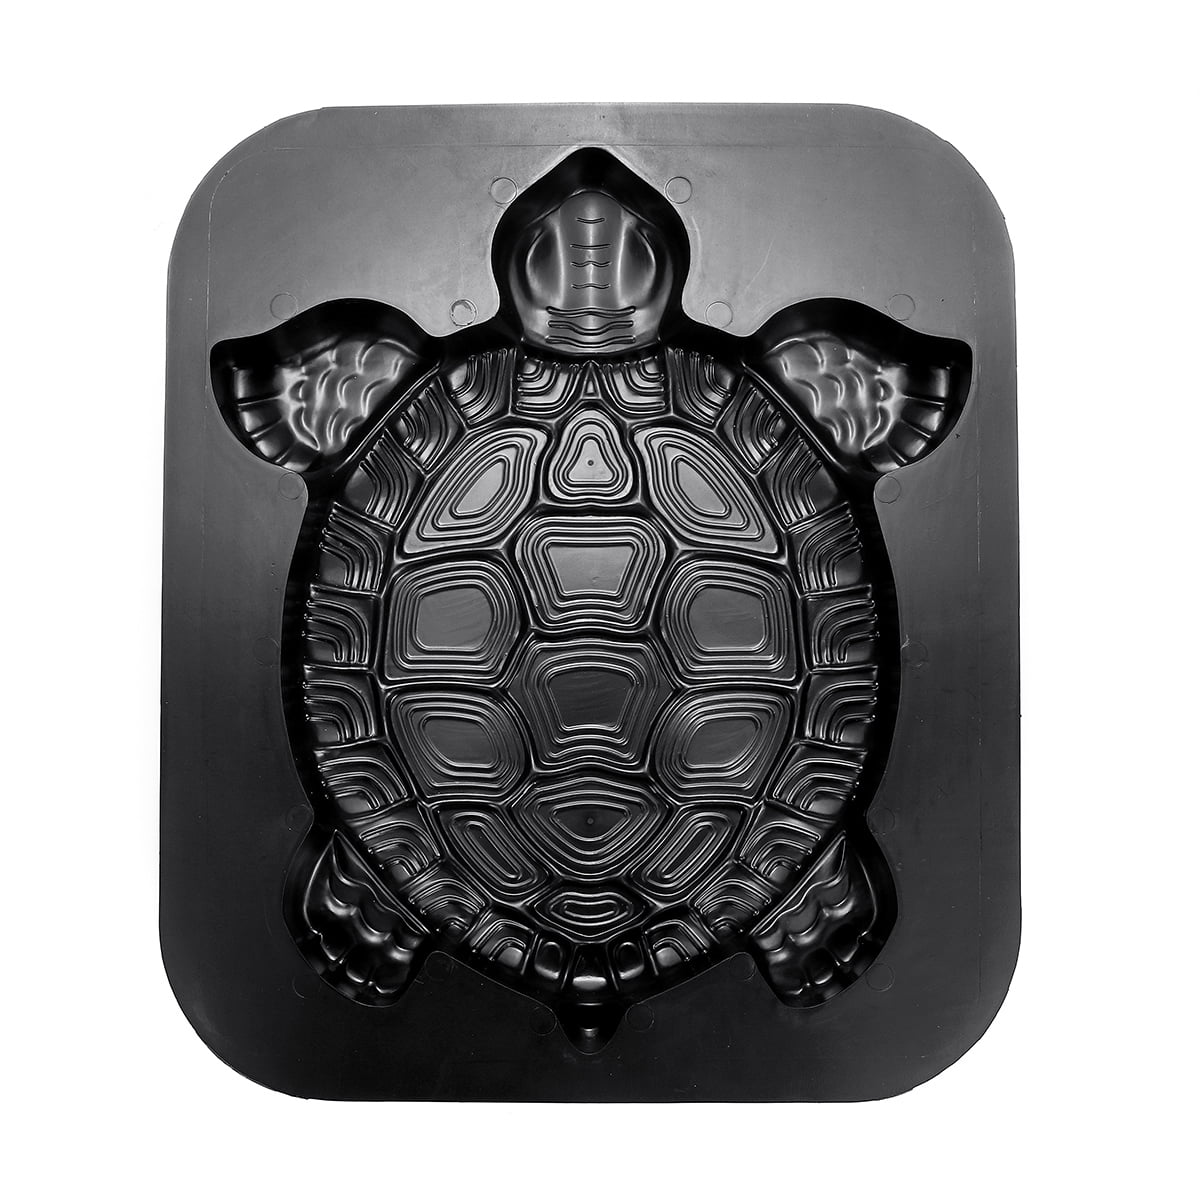 Concrete Paving Cement Mold Path Maker, Turtle Garden Stepping Stone ...